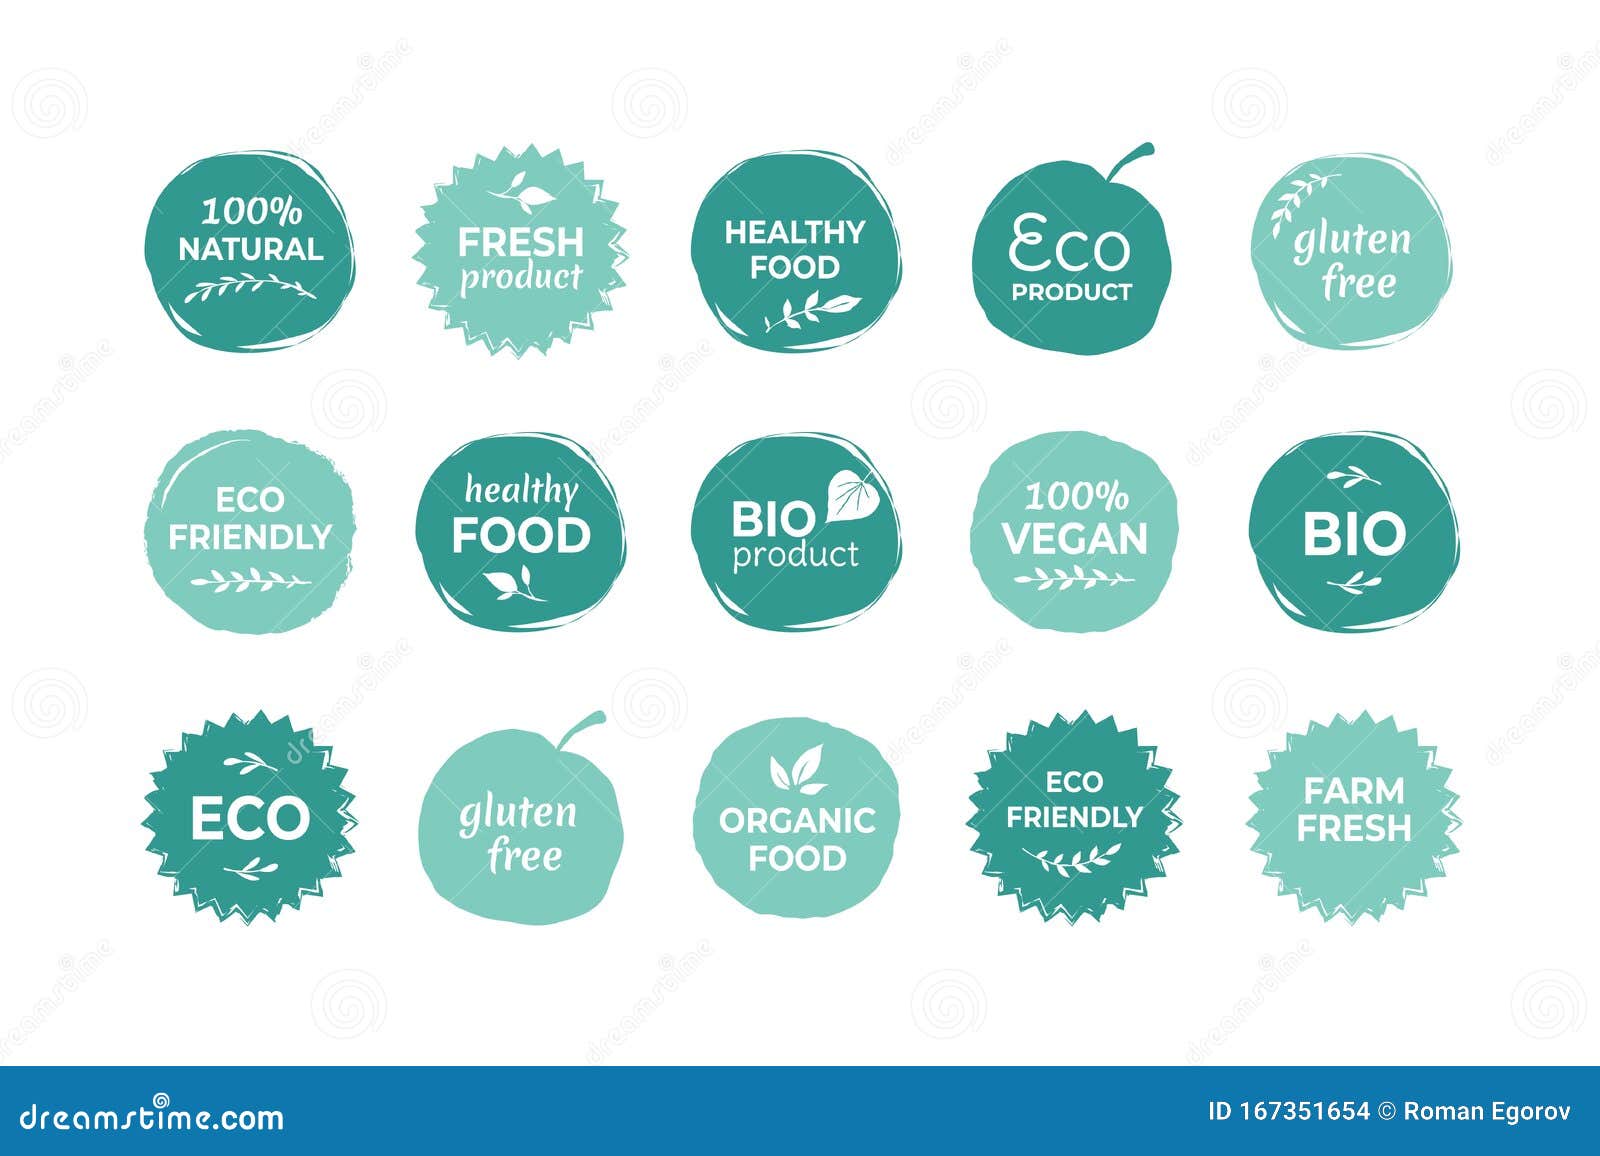 eco food label. fresh and healthy food quality stickers, vegan product and natural farming food badges.  organic